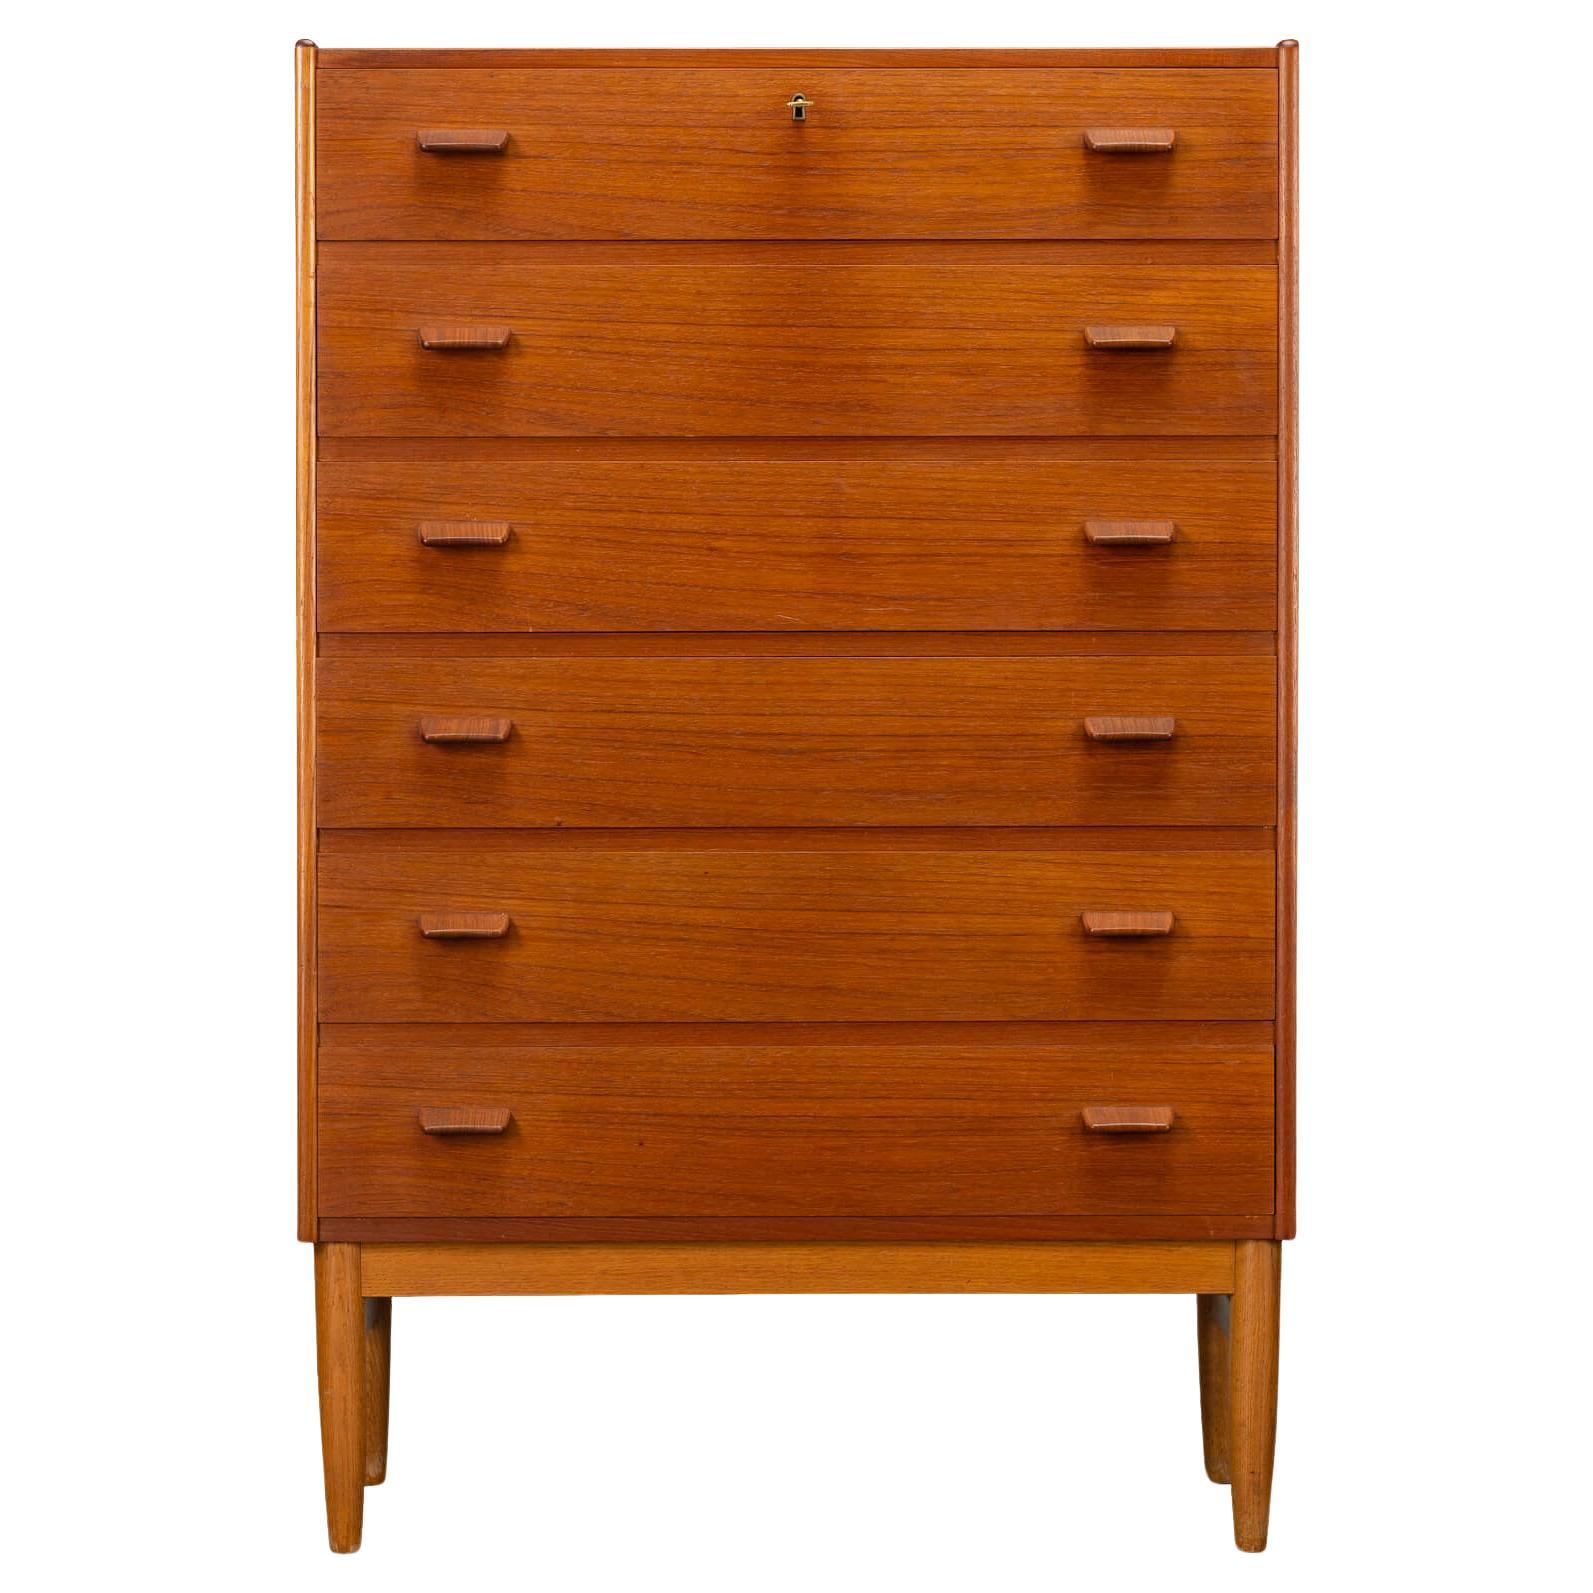 Danish Design Teak Chest of Drawers by Munch, 1960s For Sale